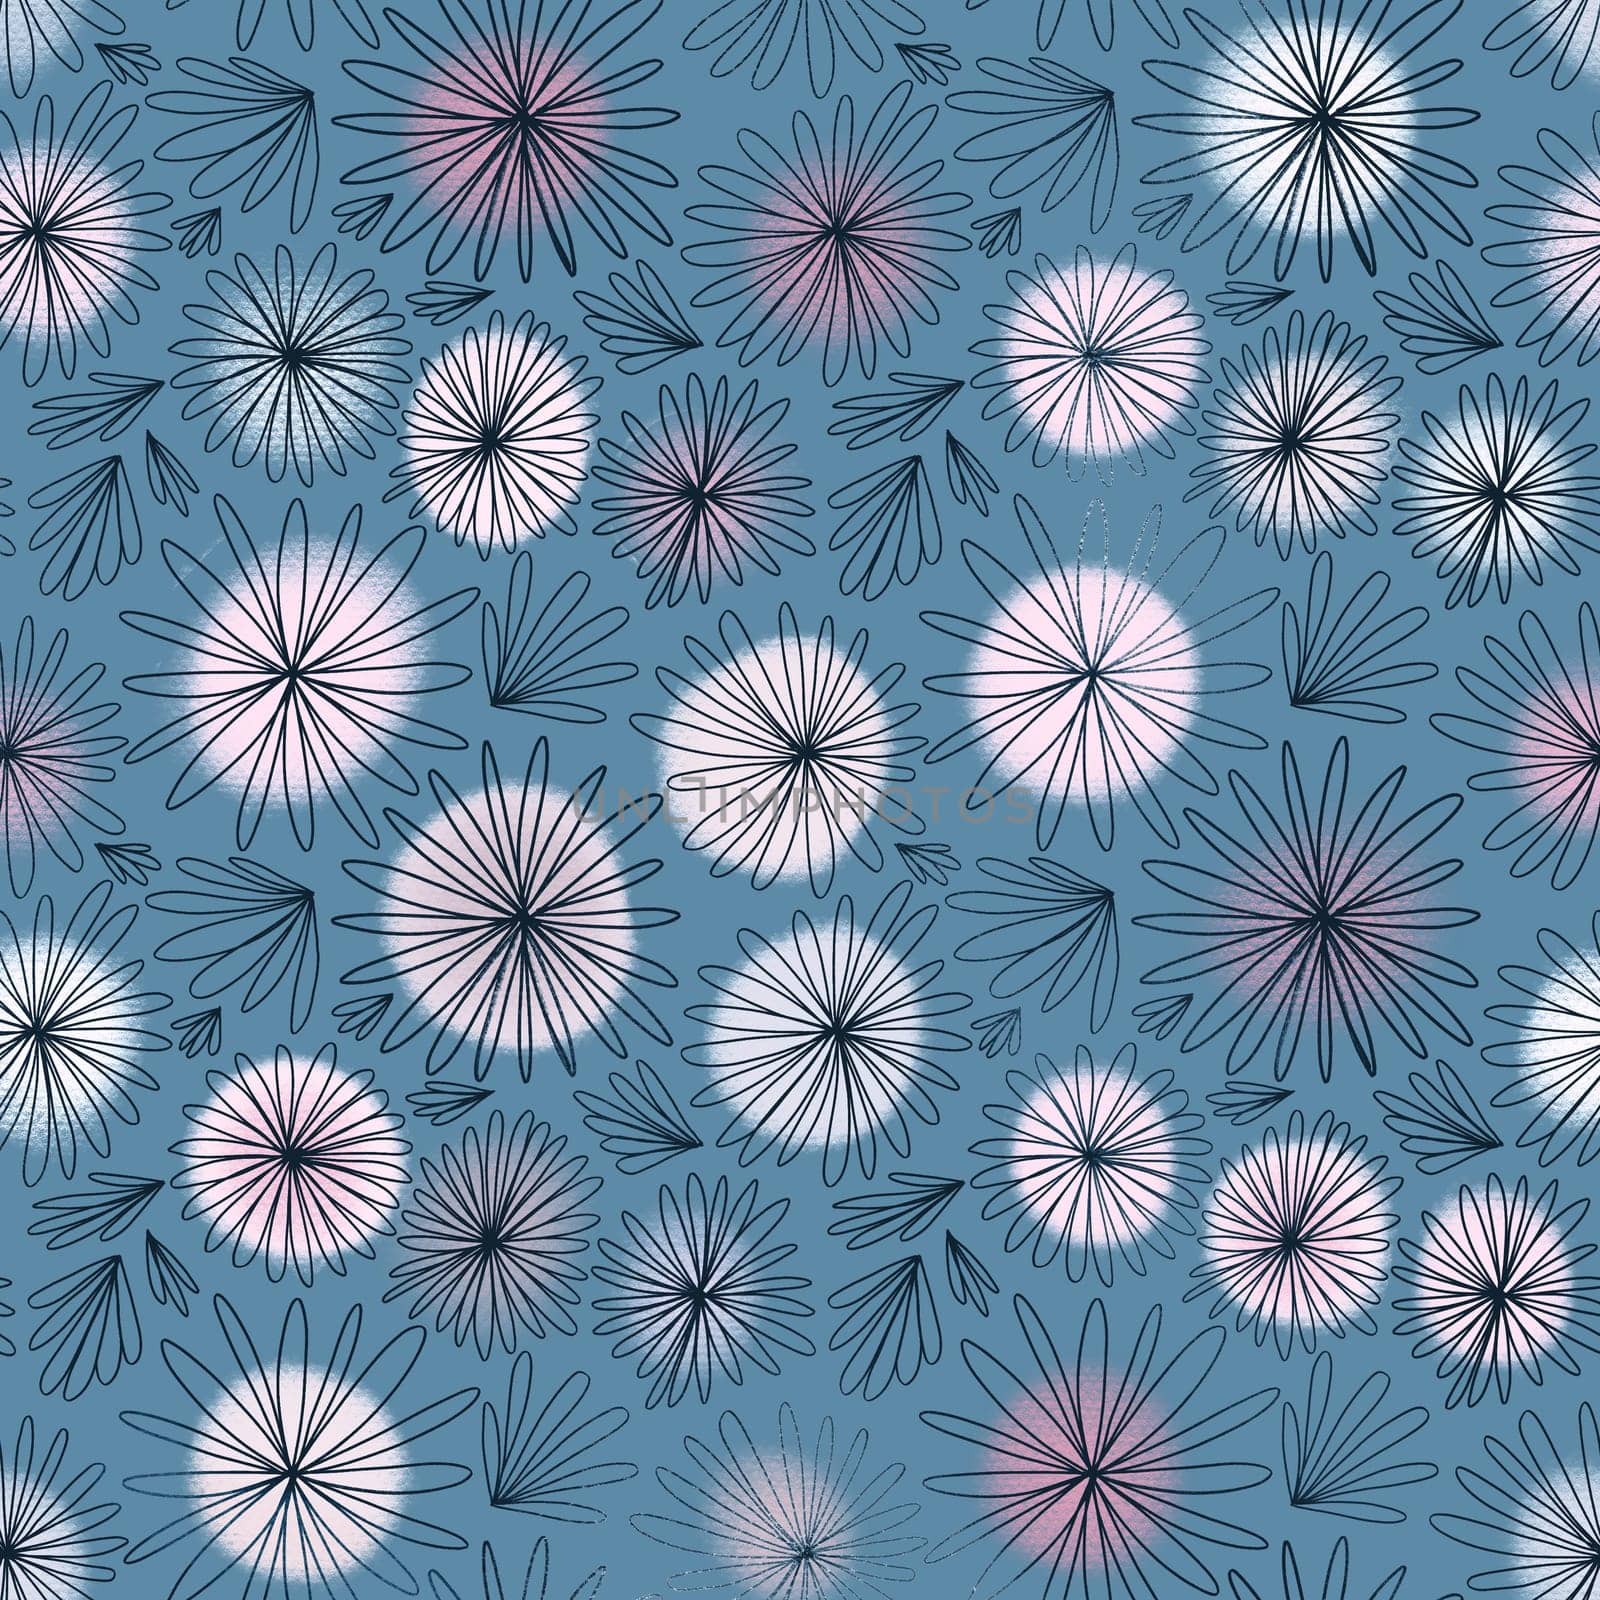 Blue botanical pattern with dandelions by Dustick